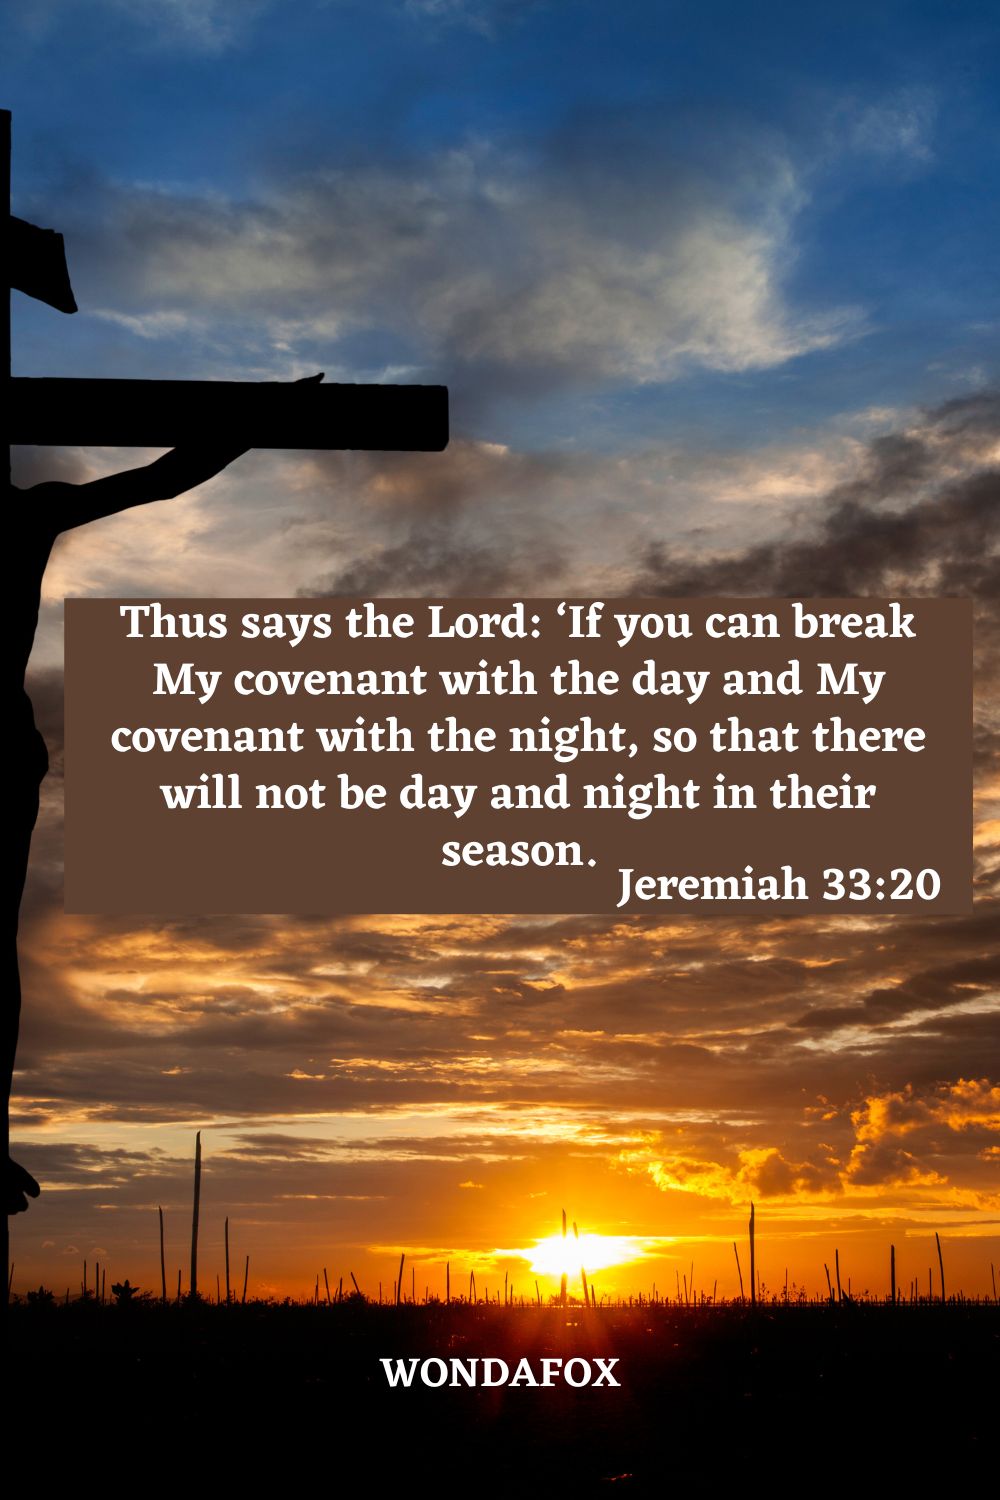 Thus says the Lord: ‘If you can break My covenant with the day and My covenant with the night, so that there will not be day and night in their season.
Jeremiah 33:20